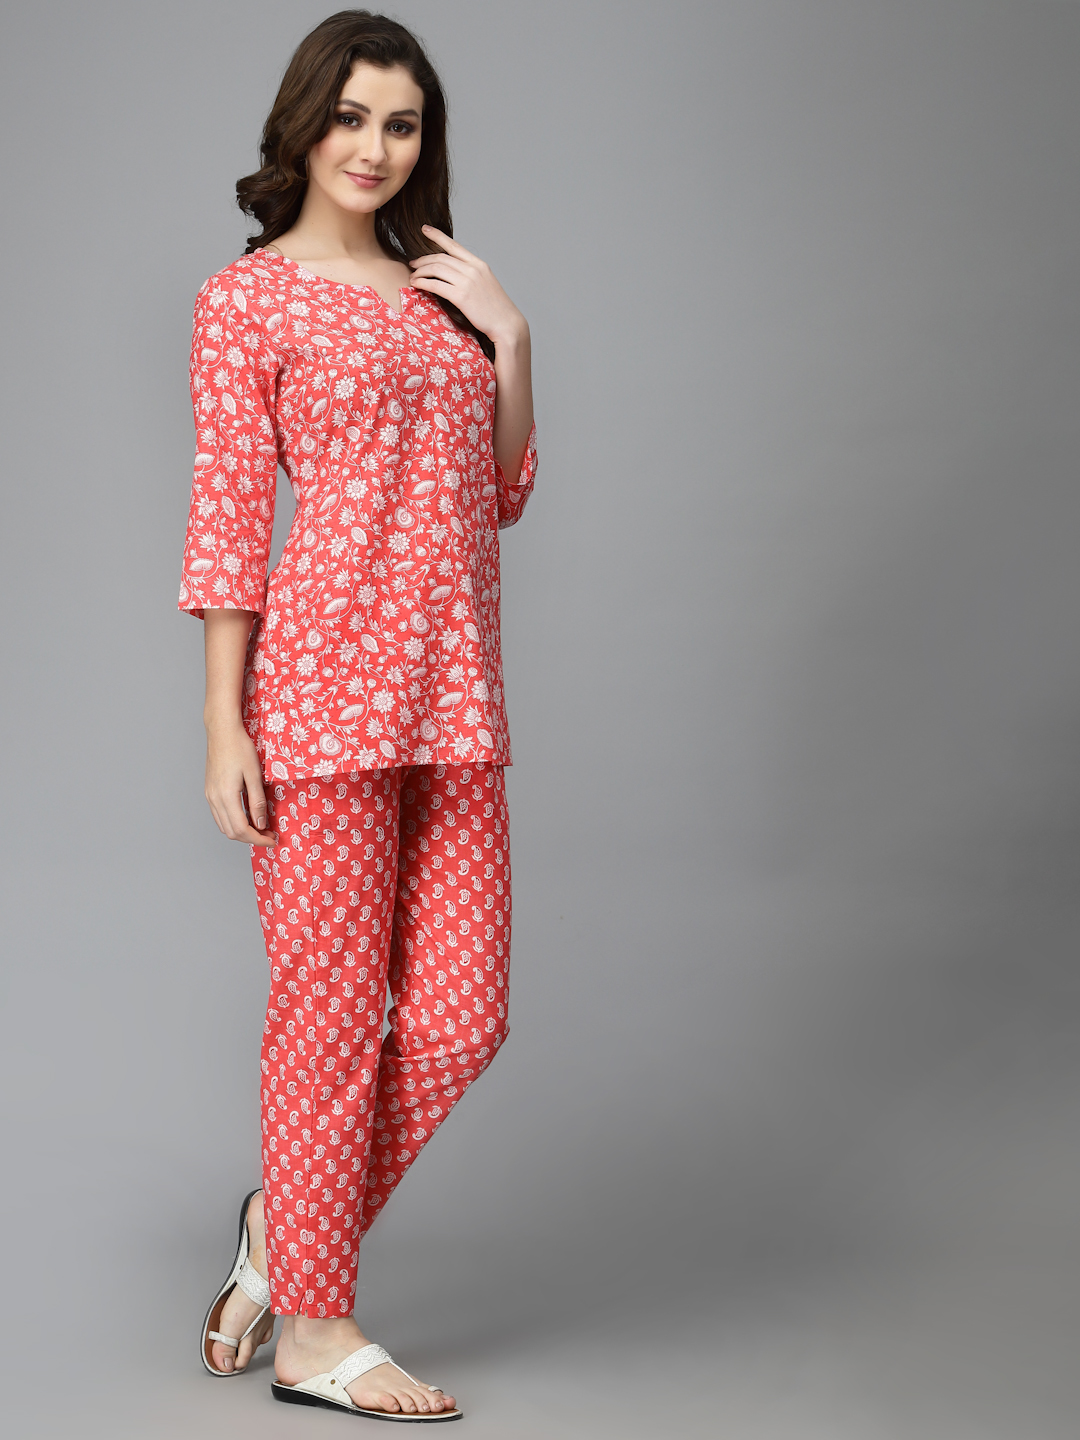 Women Floral Printed Button Up Nightsuit with Spaghetti – Clt.s